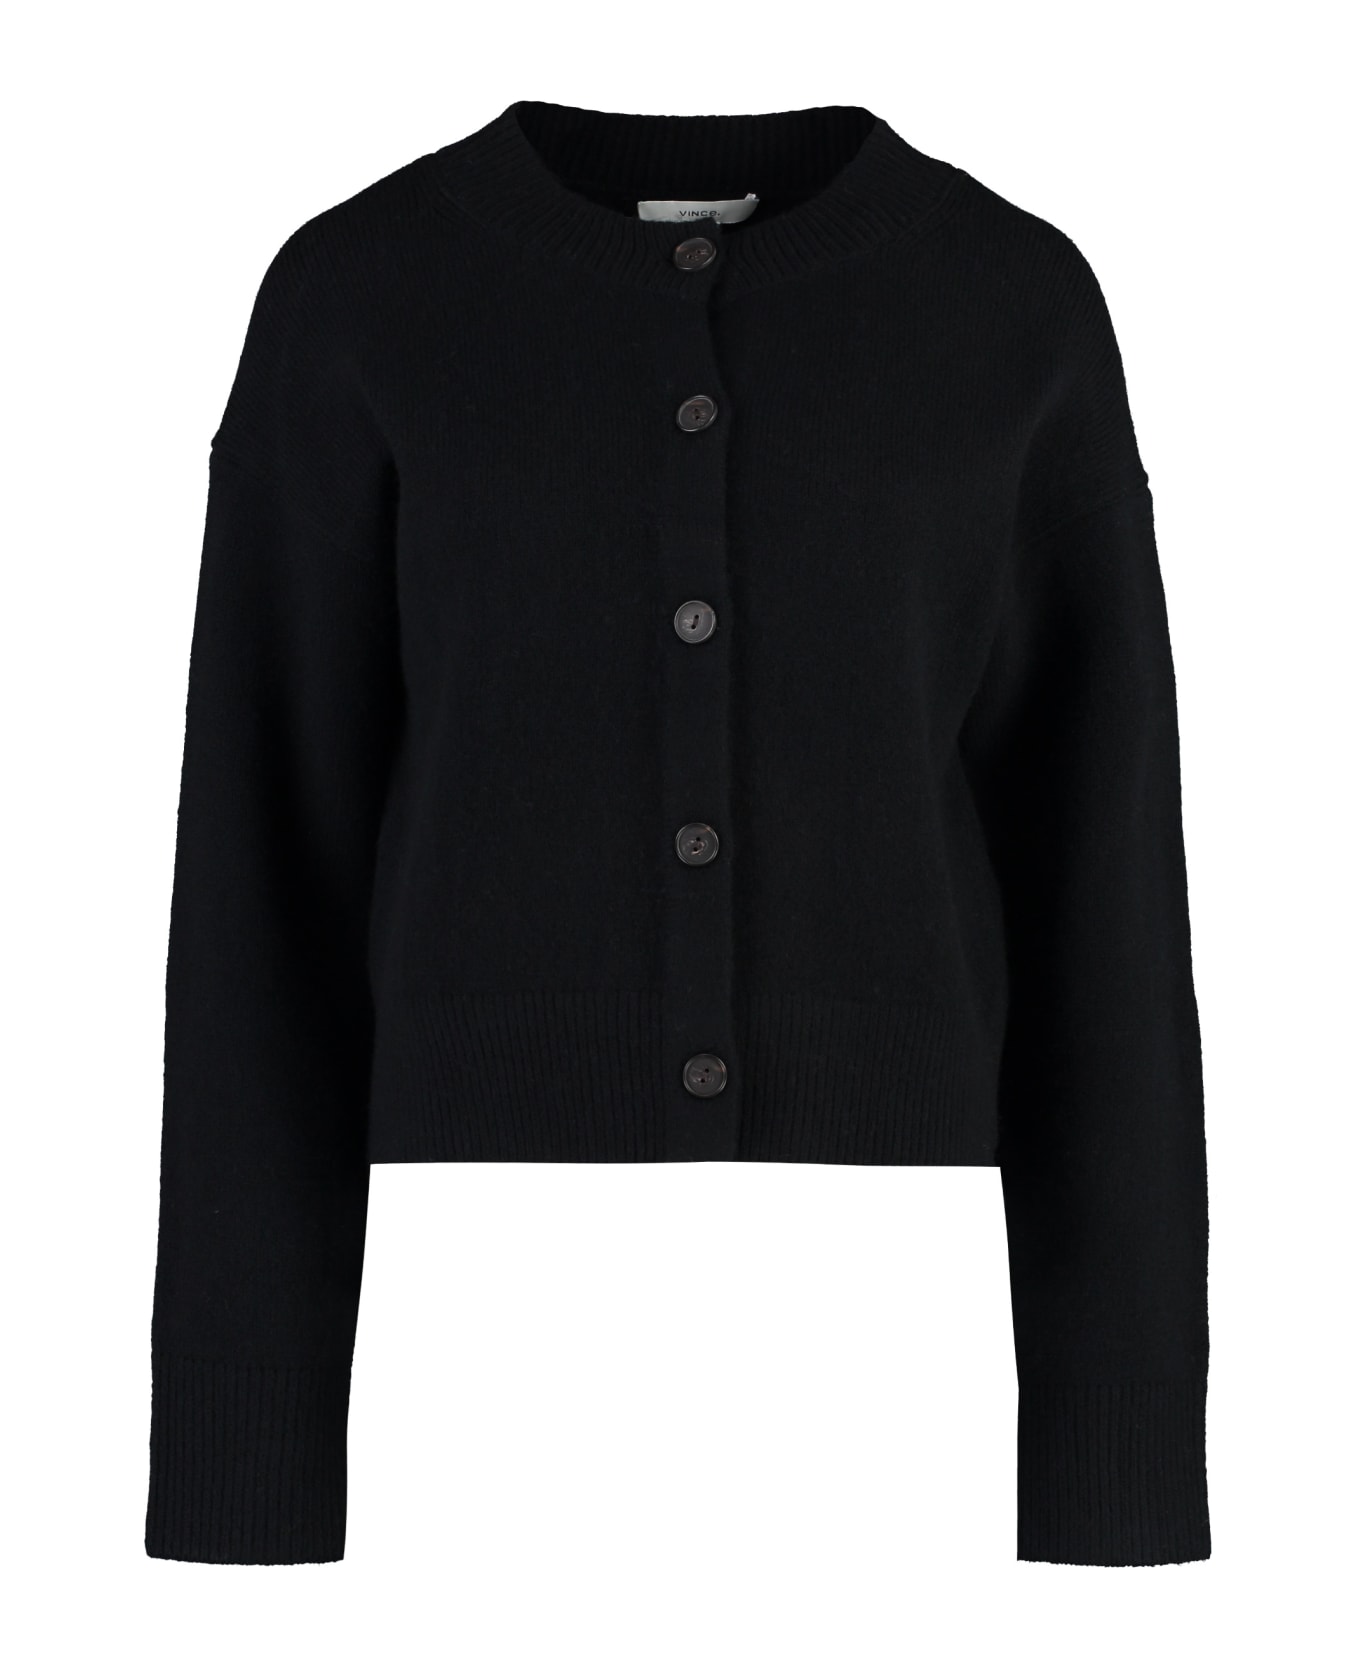 Vince Wool And Cashmere Cardigan - Blk Black